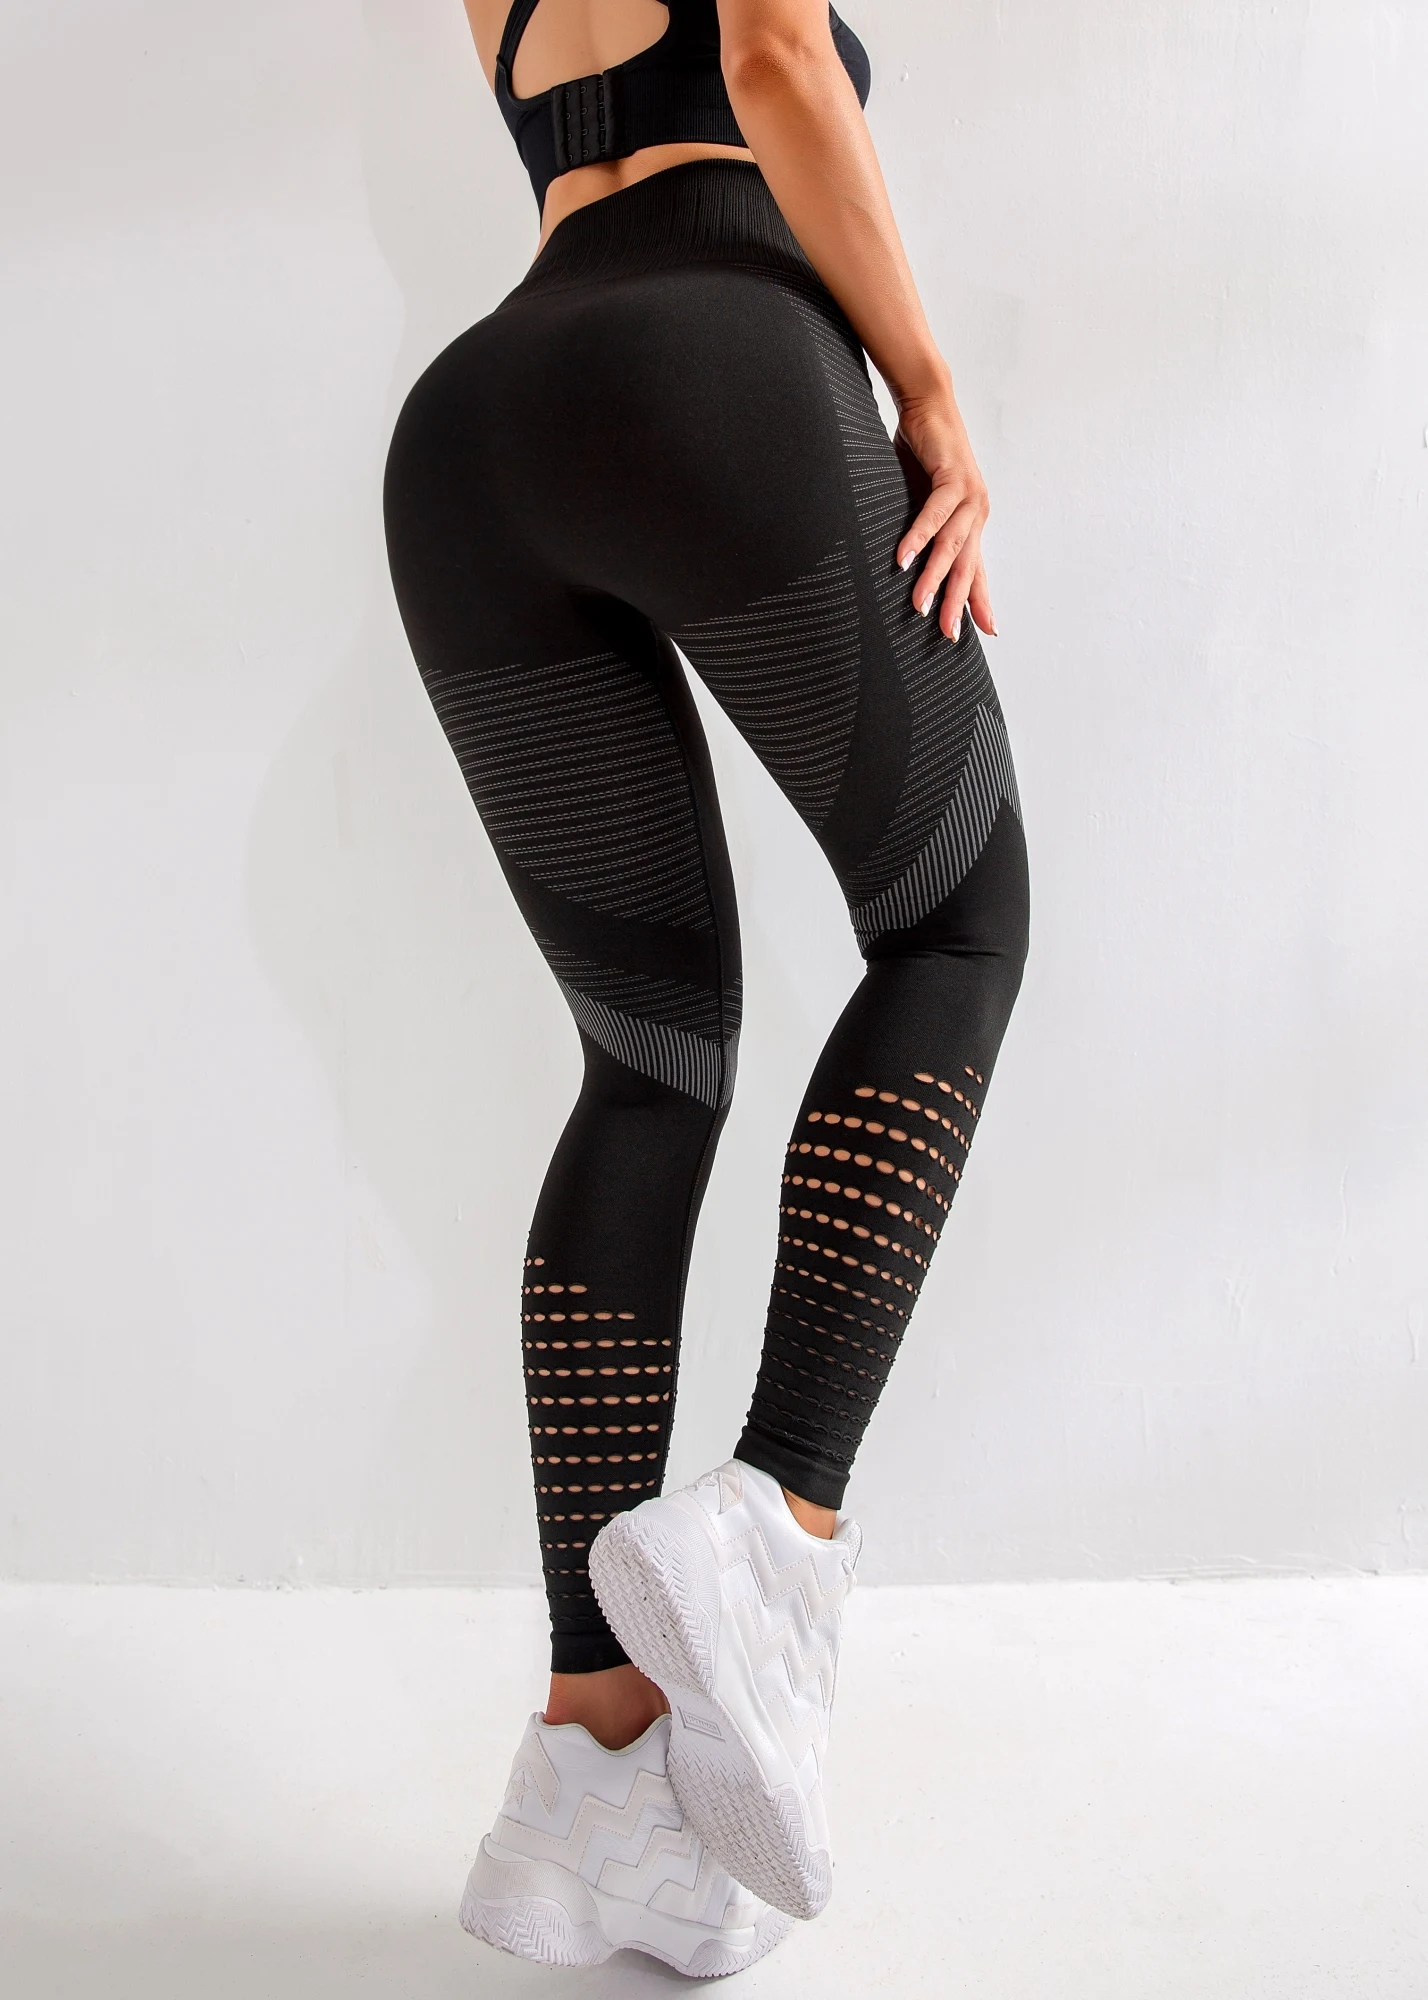 2020 Trending New Arrivals Athleisure Drop Ship 4 Colors Seamless Pants ...